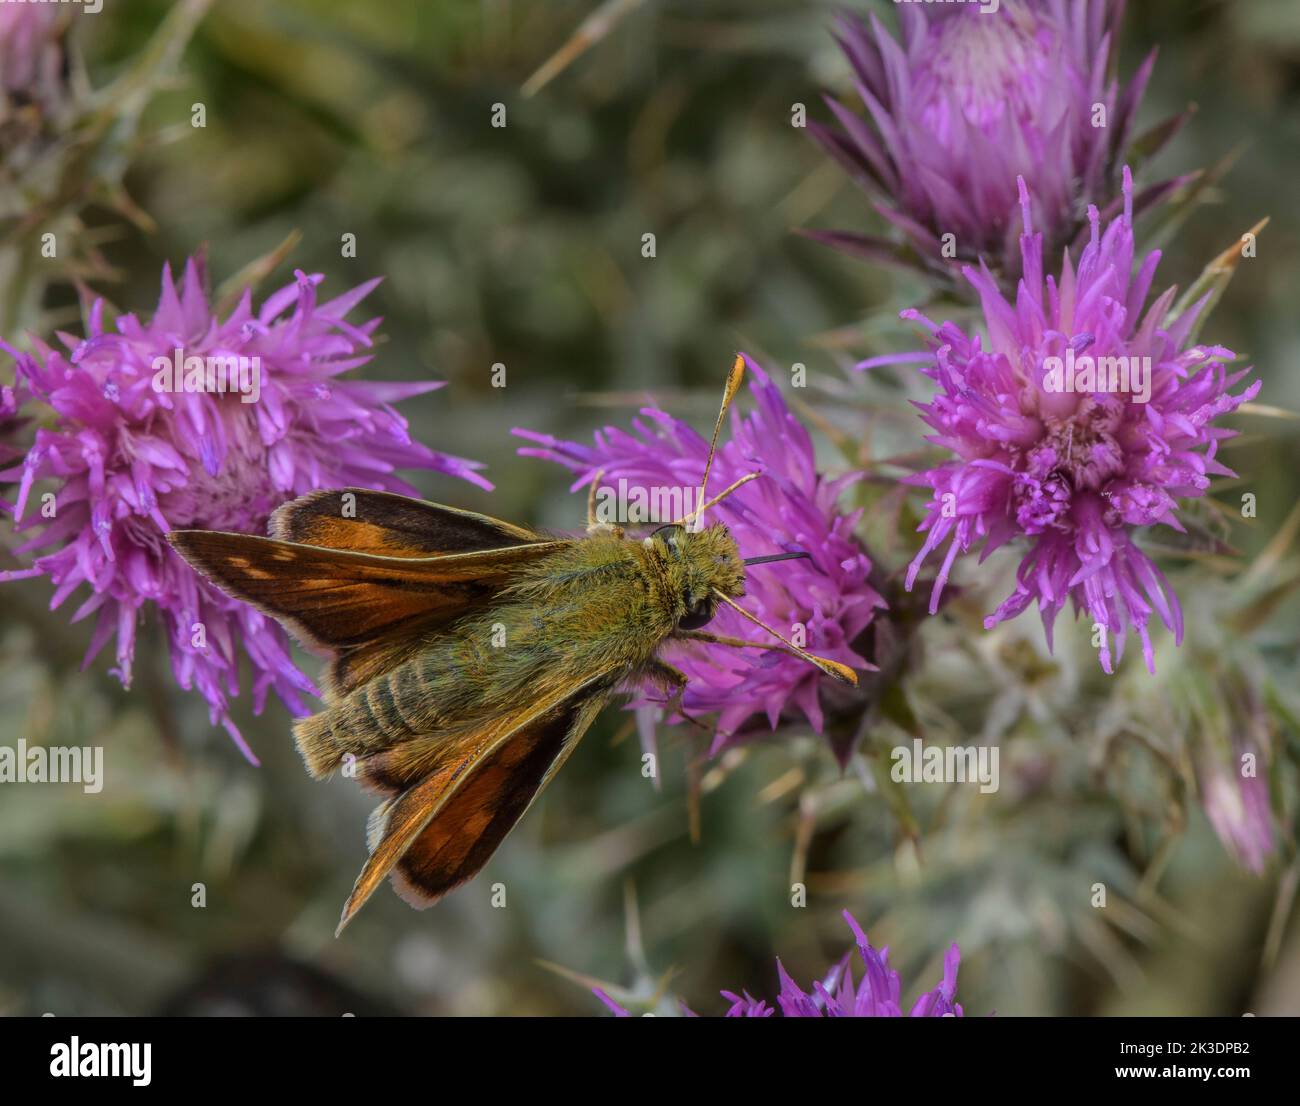 Male Silver-spotted skipper, Hesperia comma, feeding on thistle flowers. Stock Photo